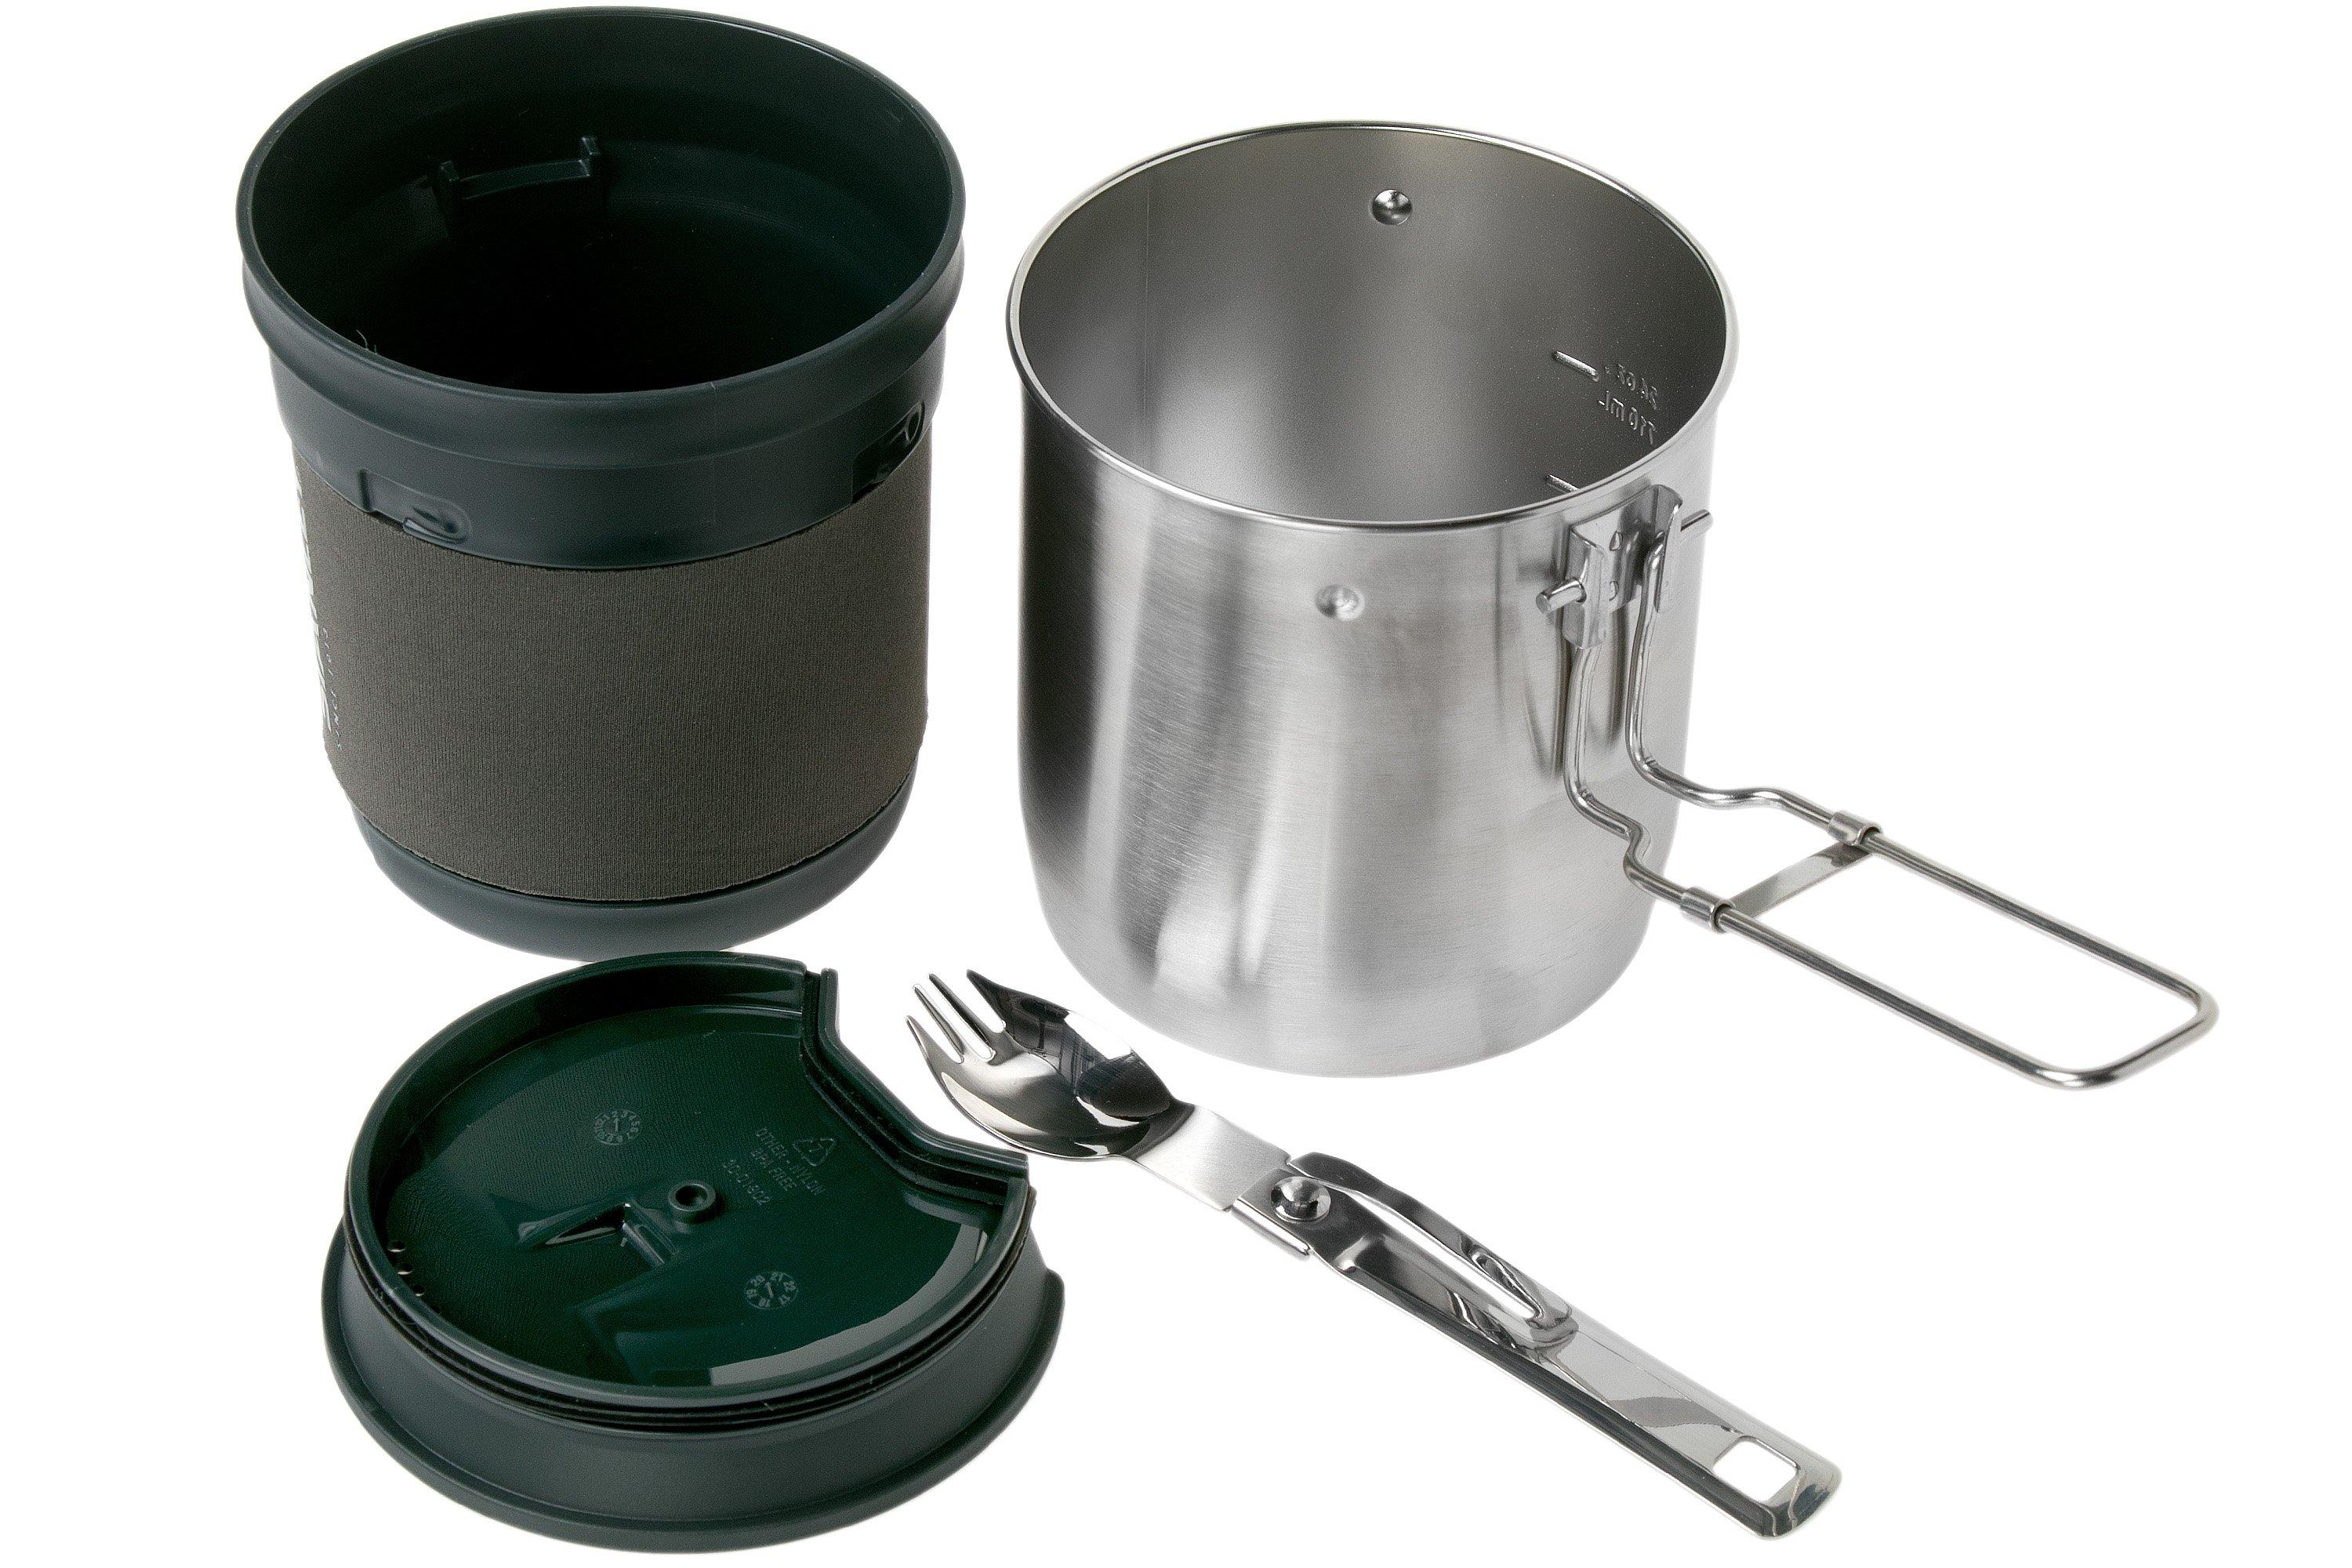 Stanley Adventure All-in-One Two Bowl Camp Cook Set - Stainless Steel 